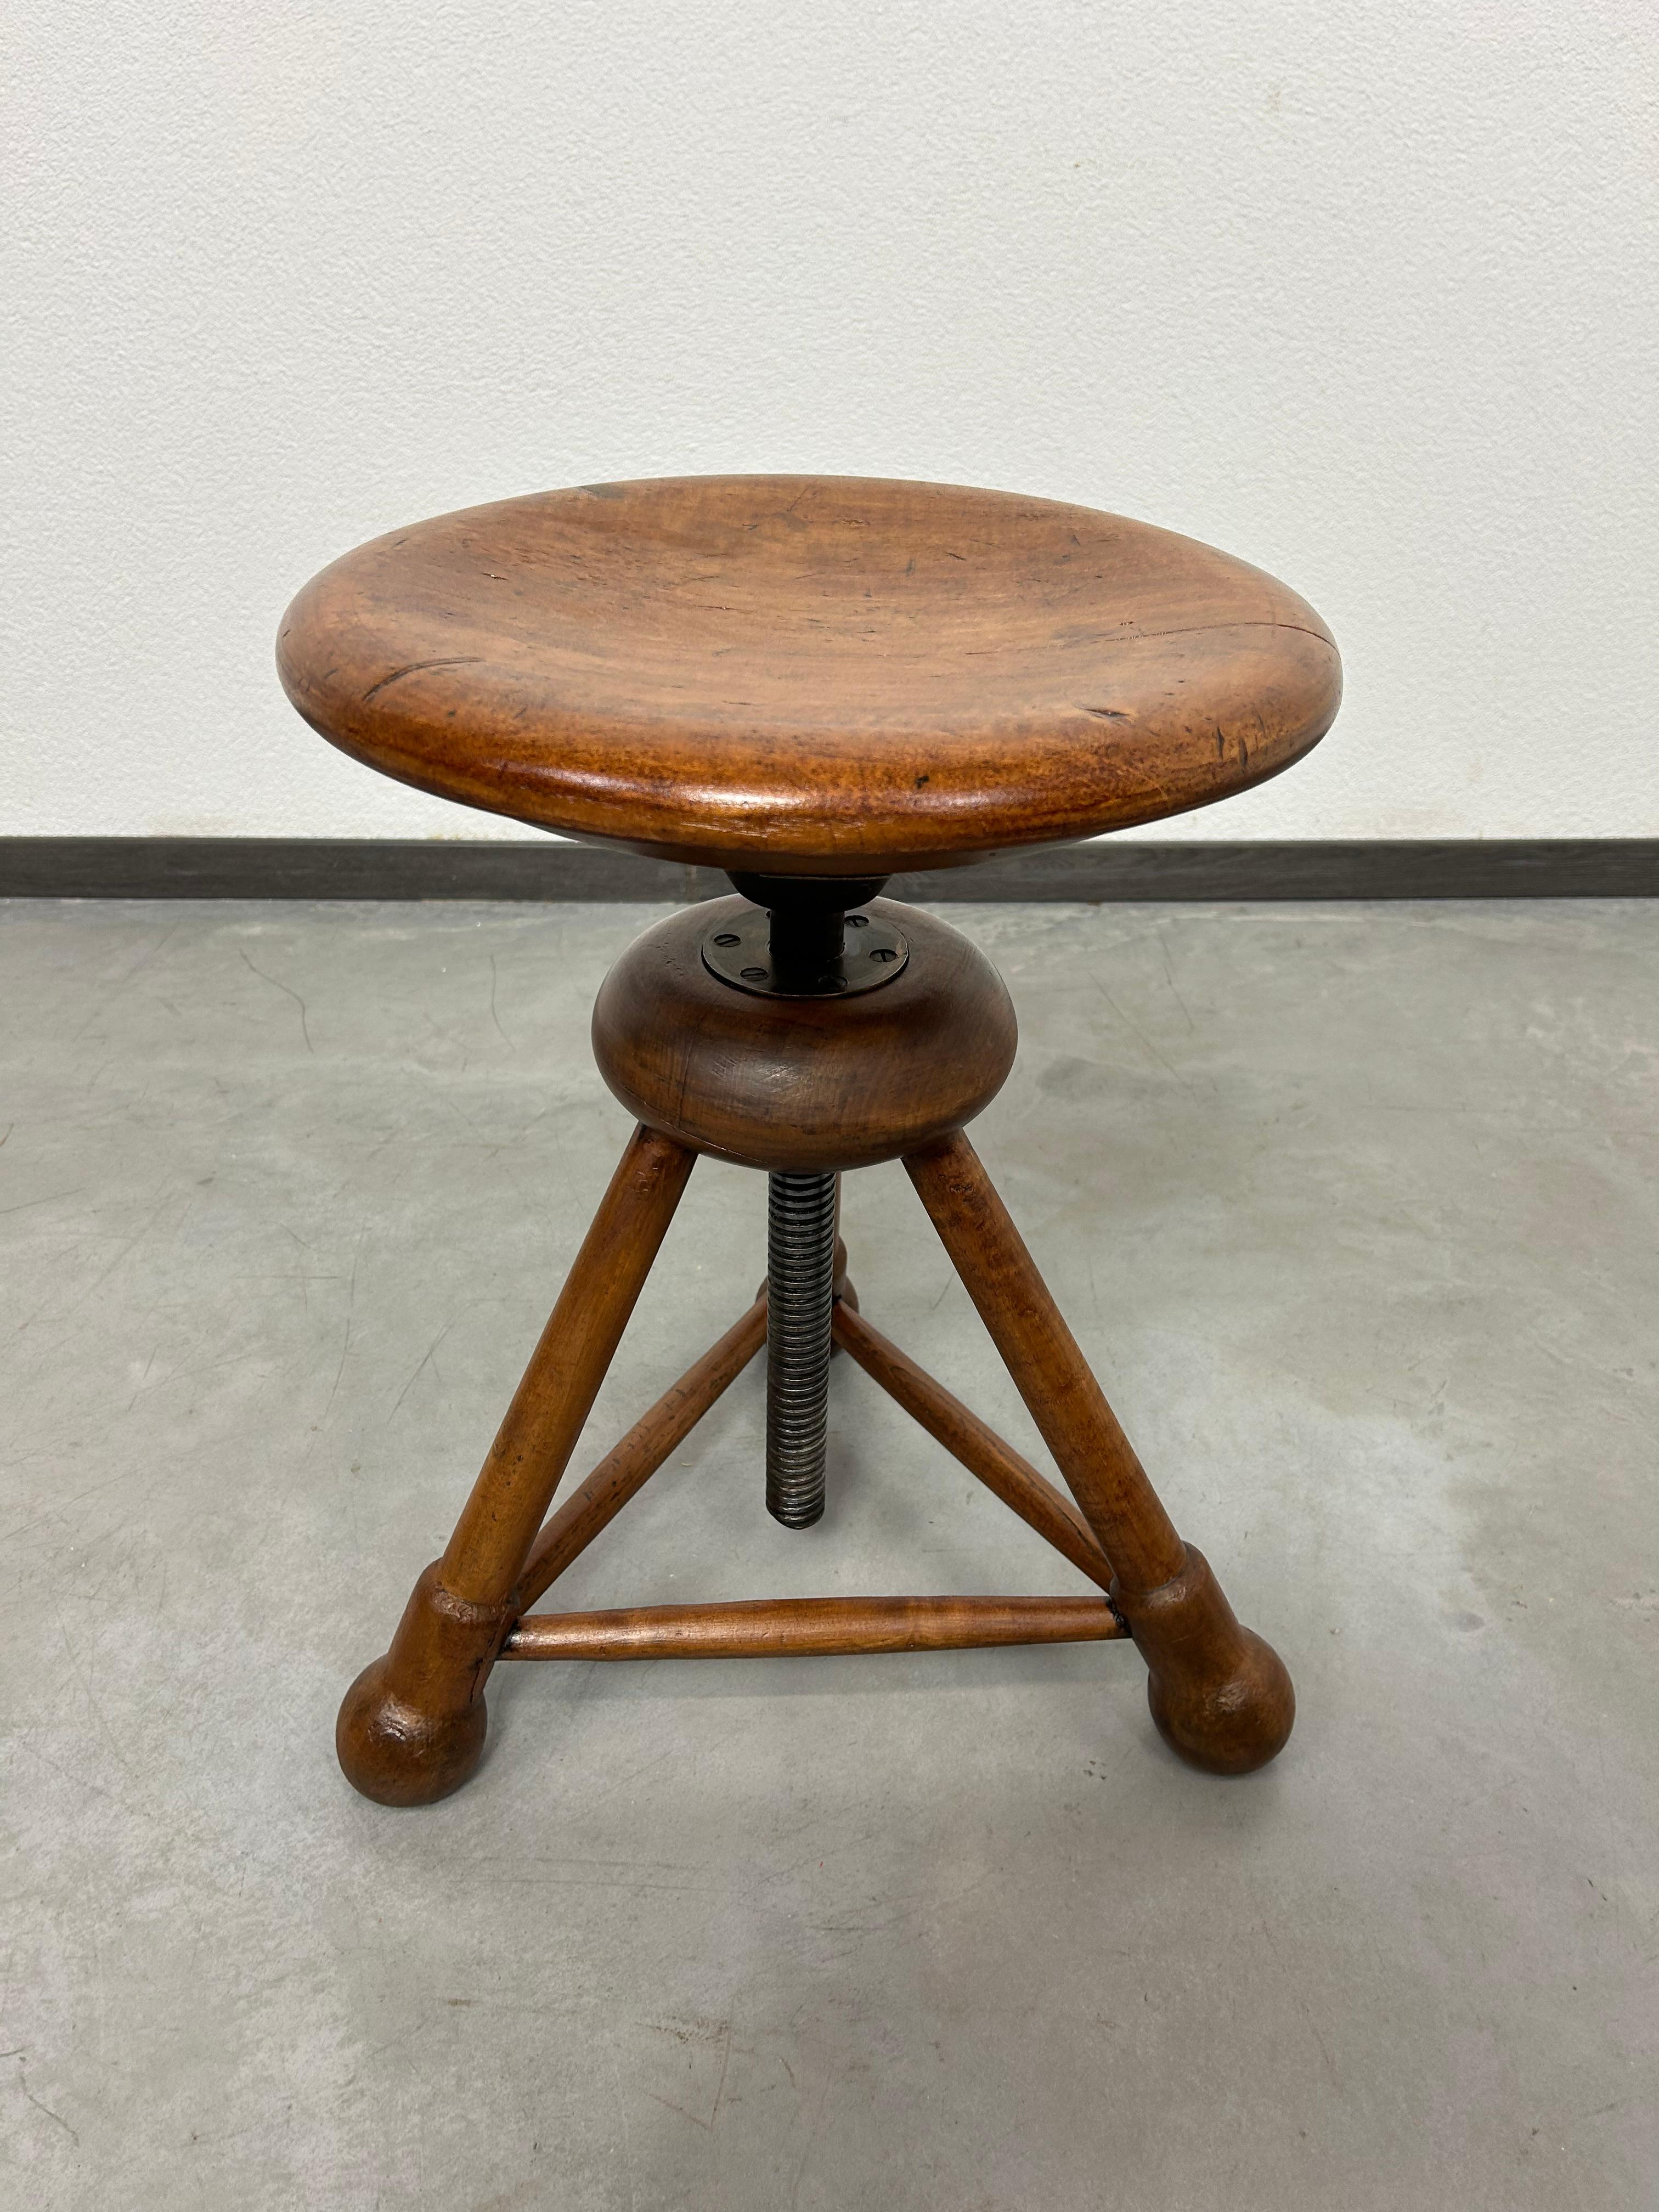 Vintage oak swivel stool in very good original condition with signs of use.